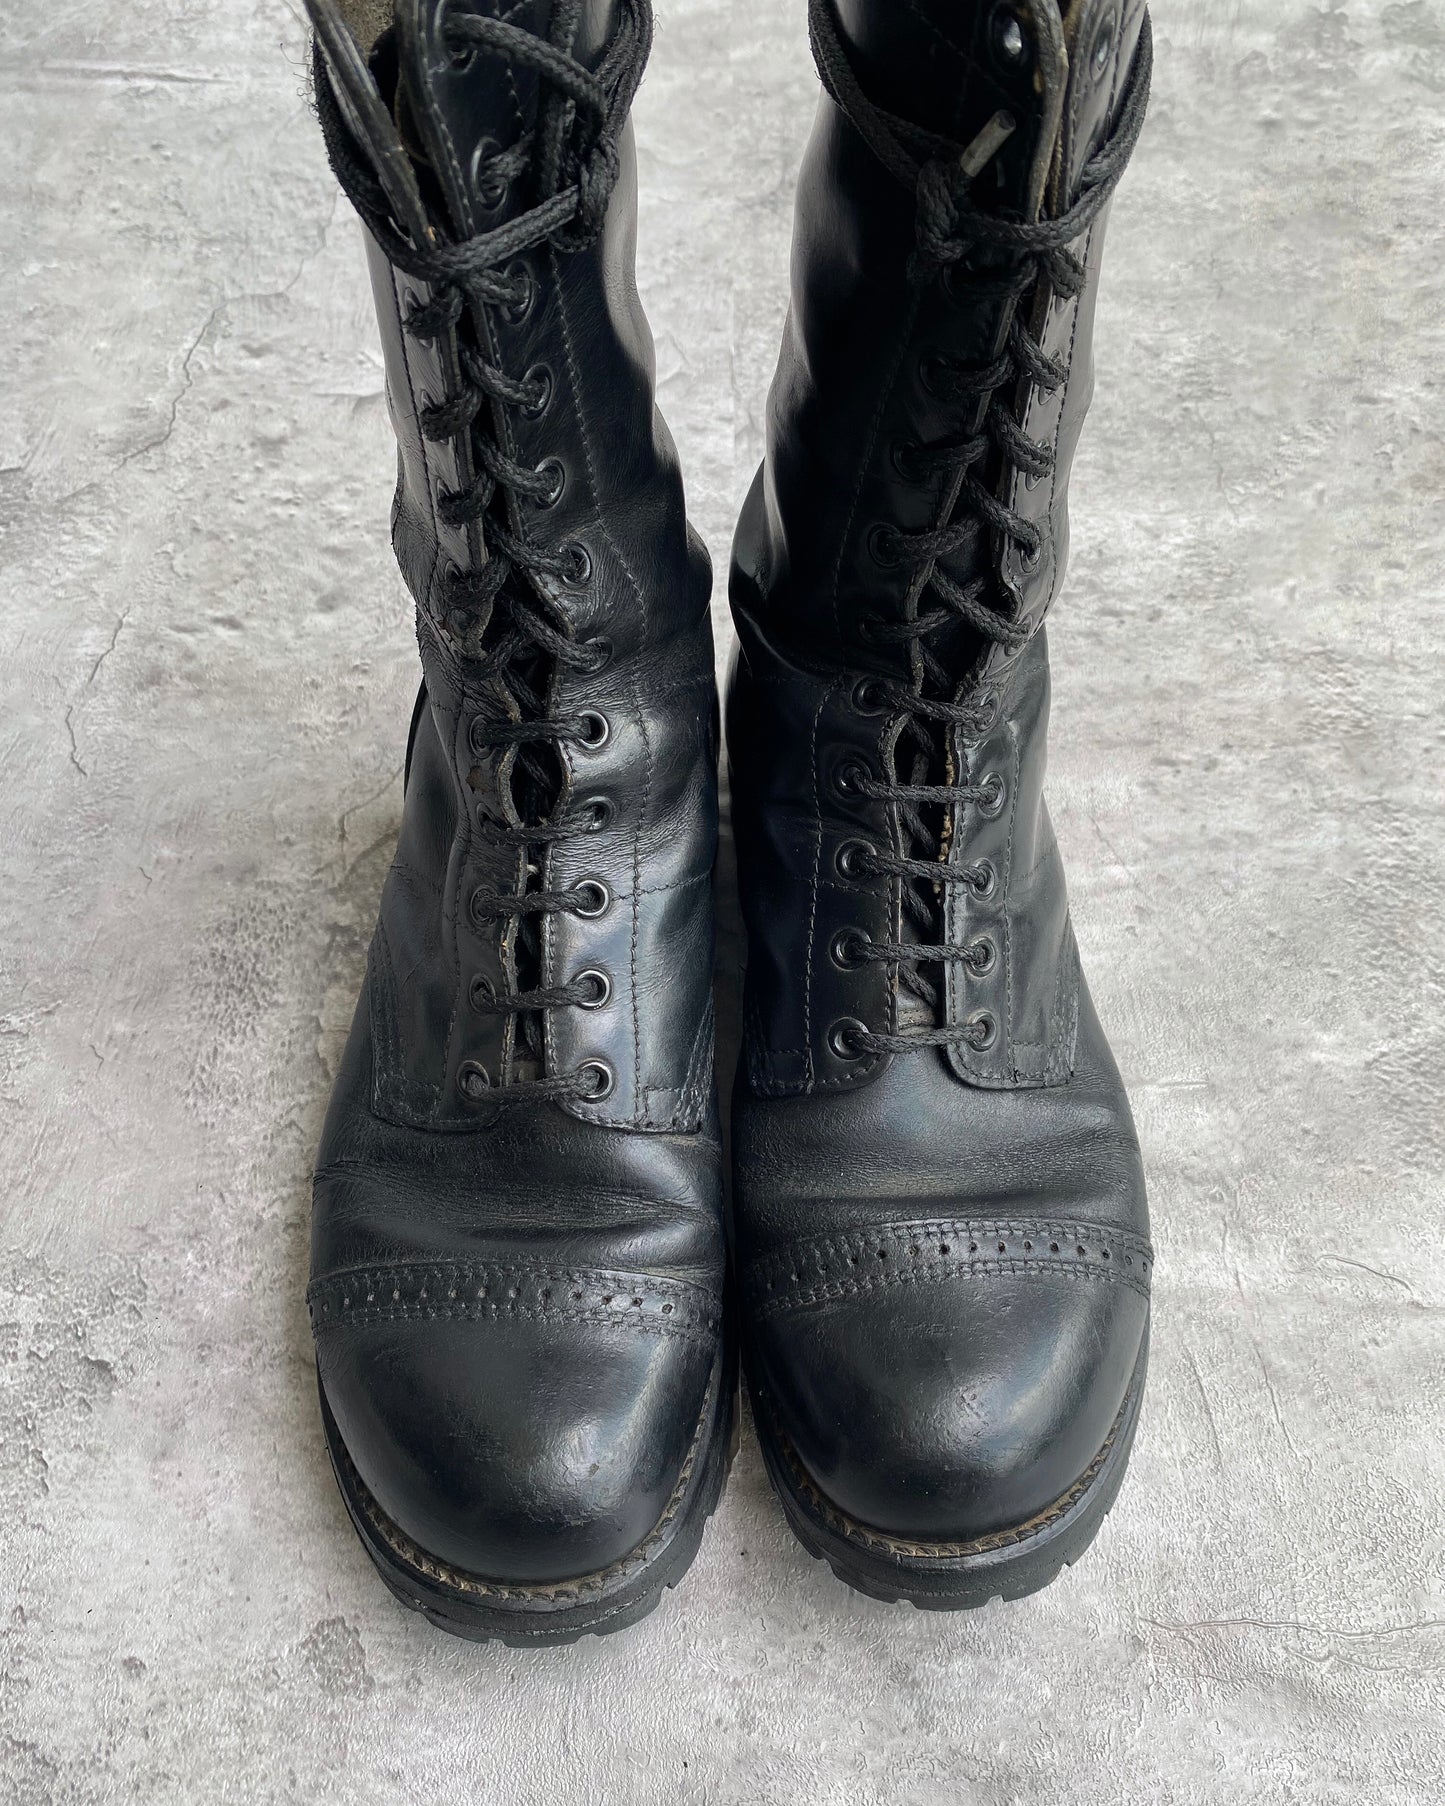 1980S US ARMY PARATROOPER VIBRAM SOLE BOOTS (8.5)